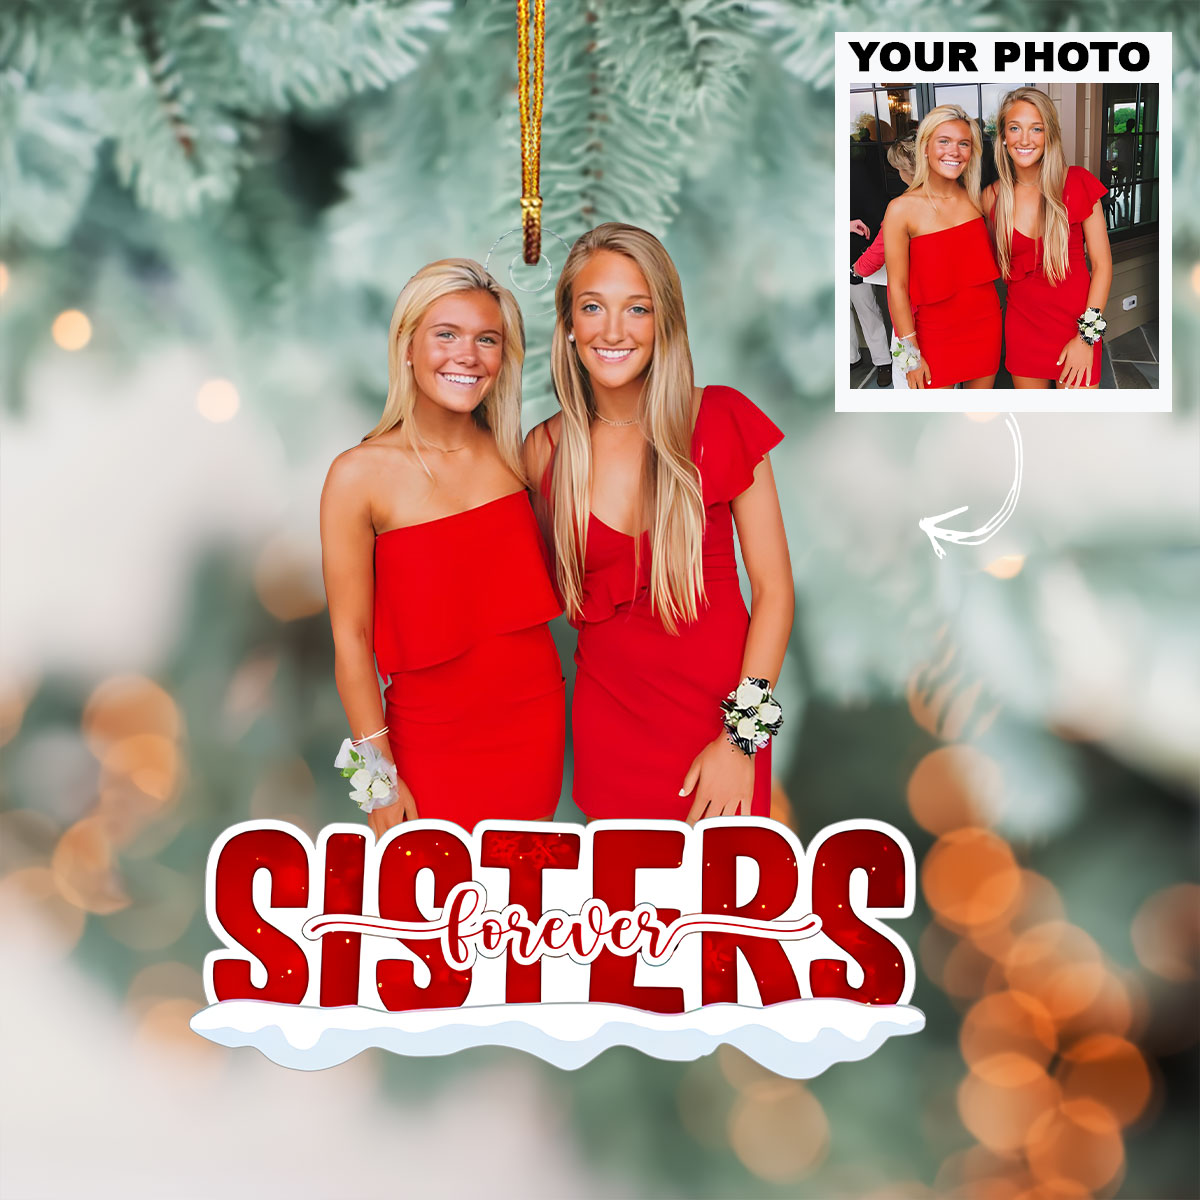 Sisters Forever Red Version - Personalized Custom Photo Mica Ornament - Christmas Gift For Family Members, Besties, Friends UPL0DM018